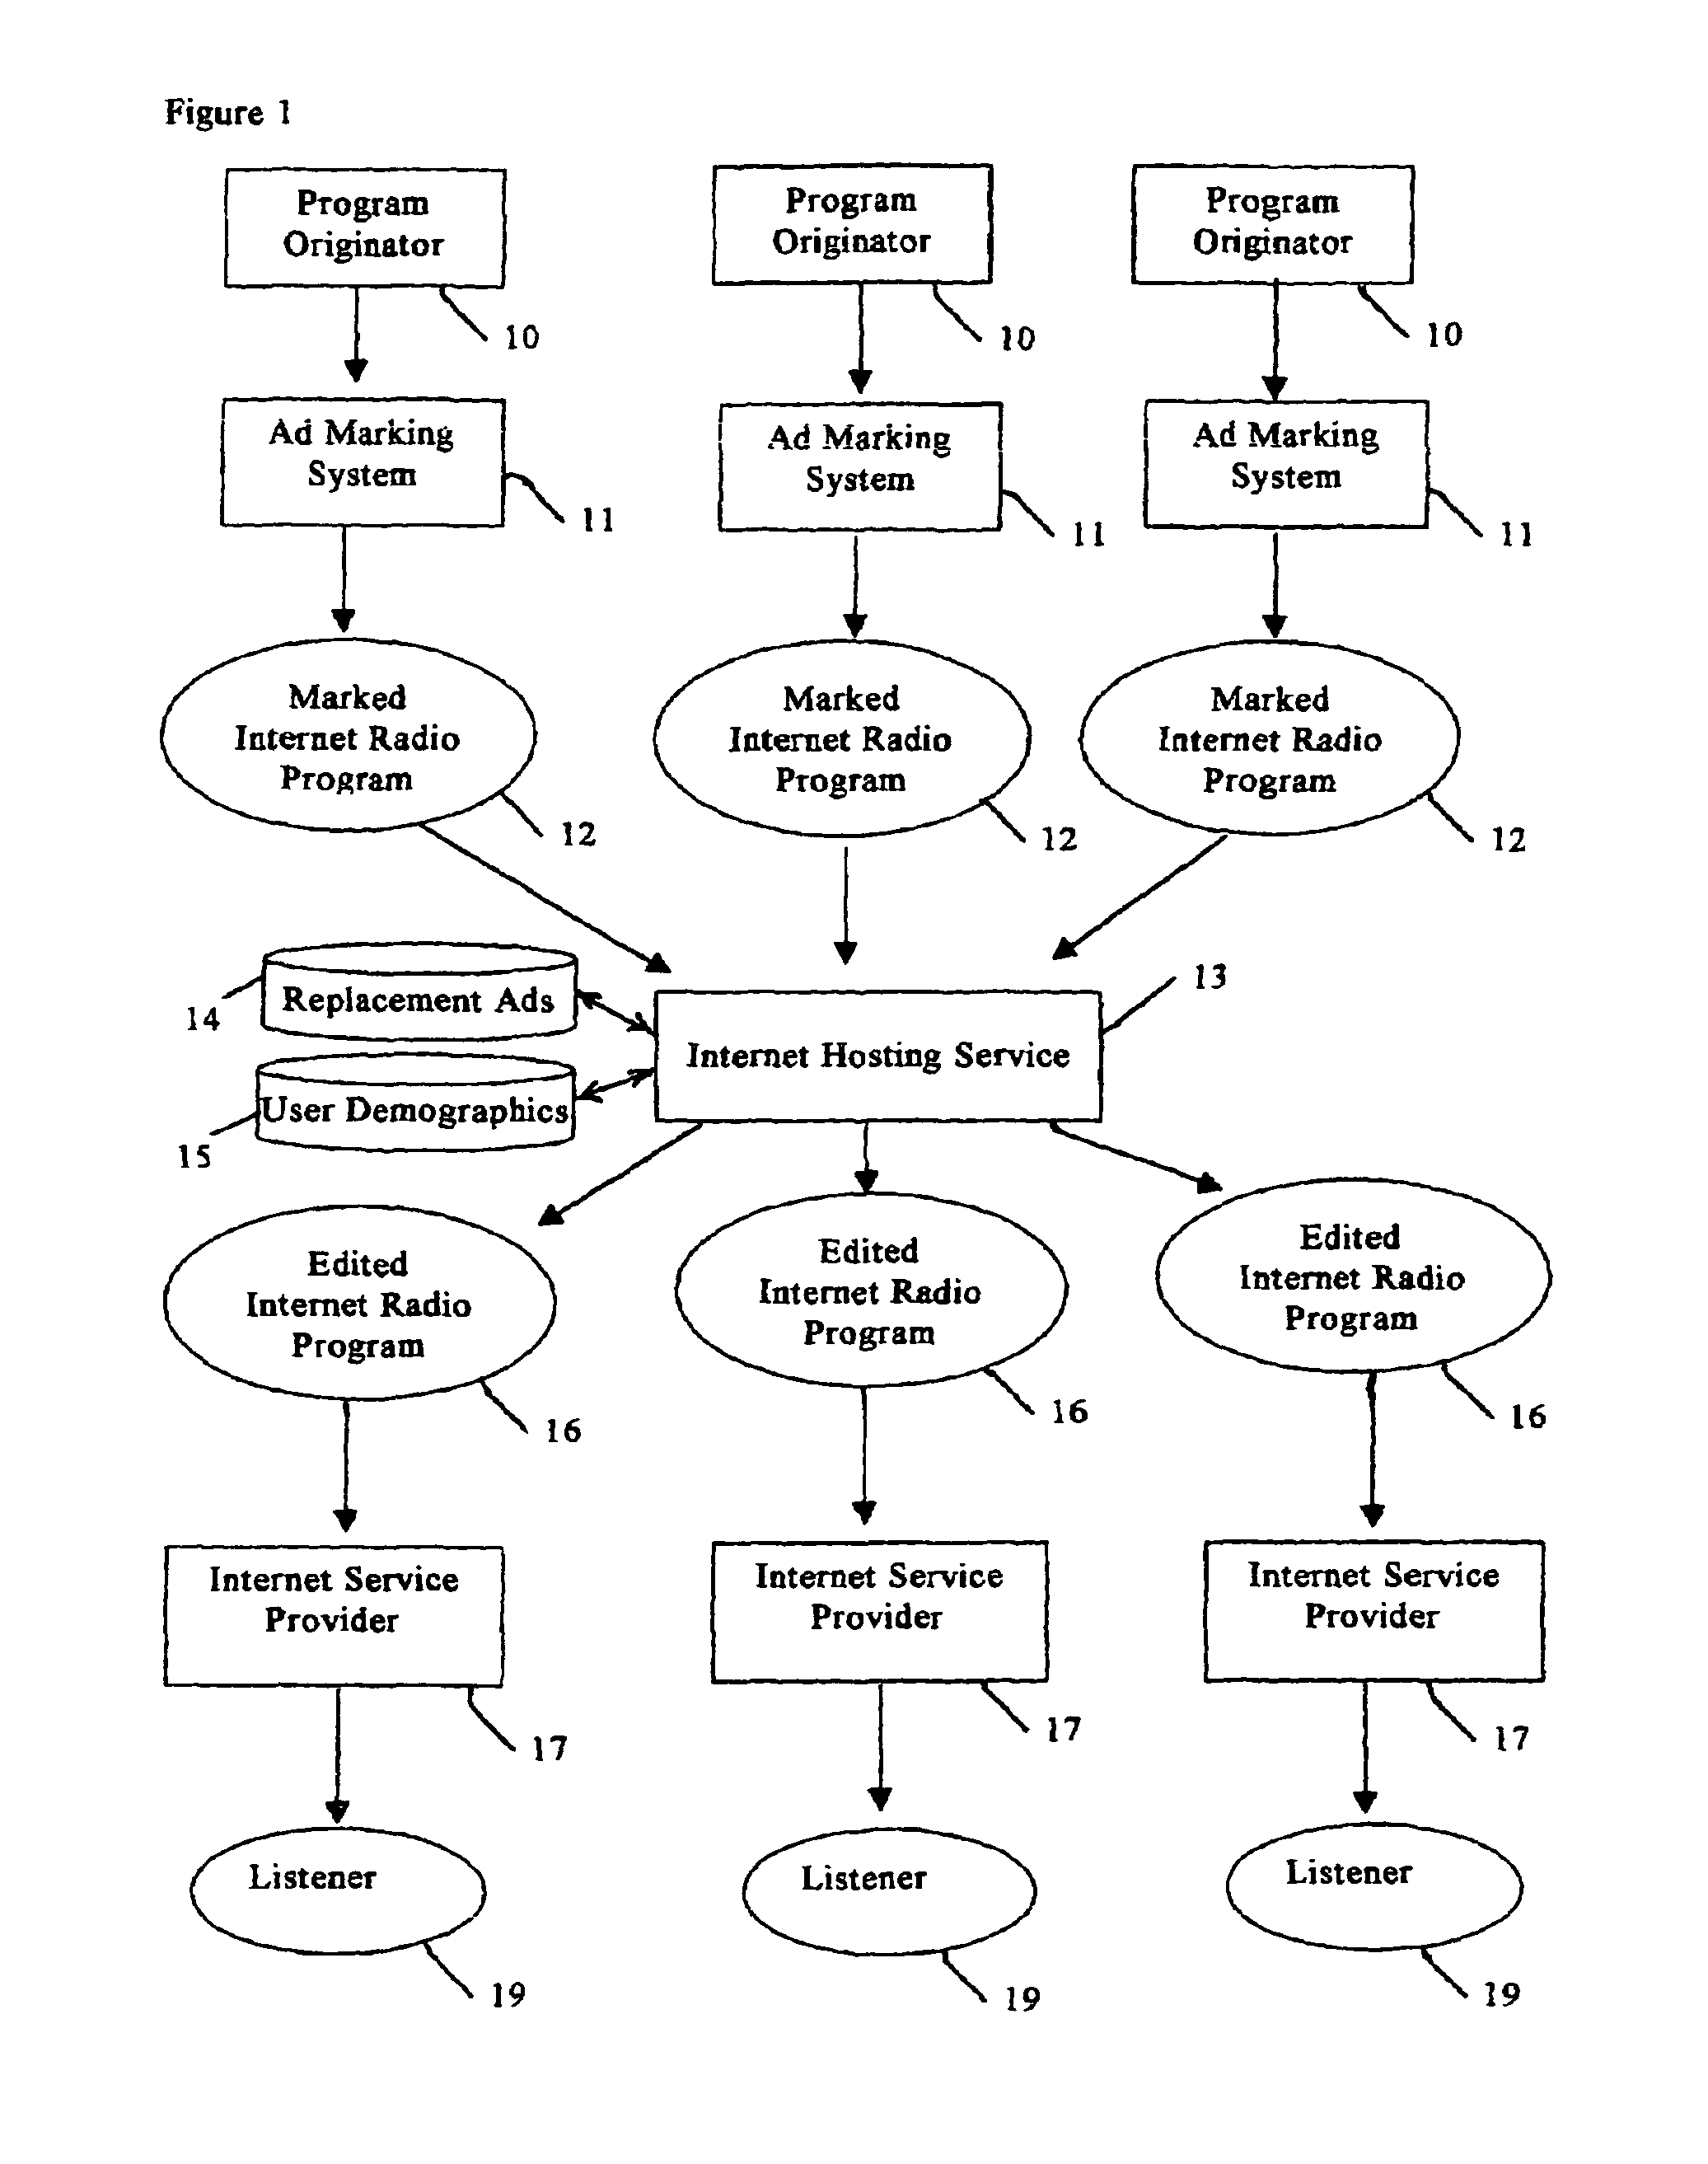 System for modifying and targeting advertising content of internet radio broadcasts